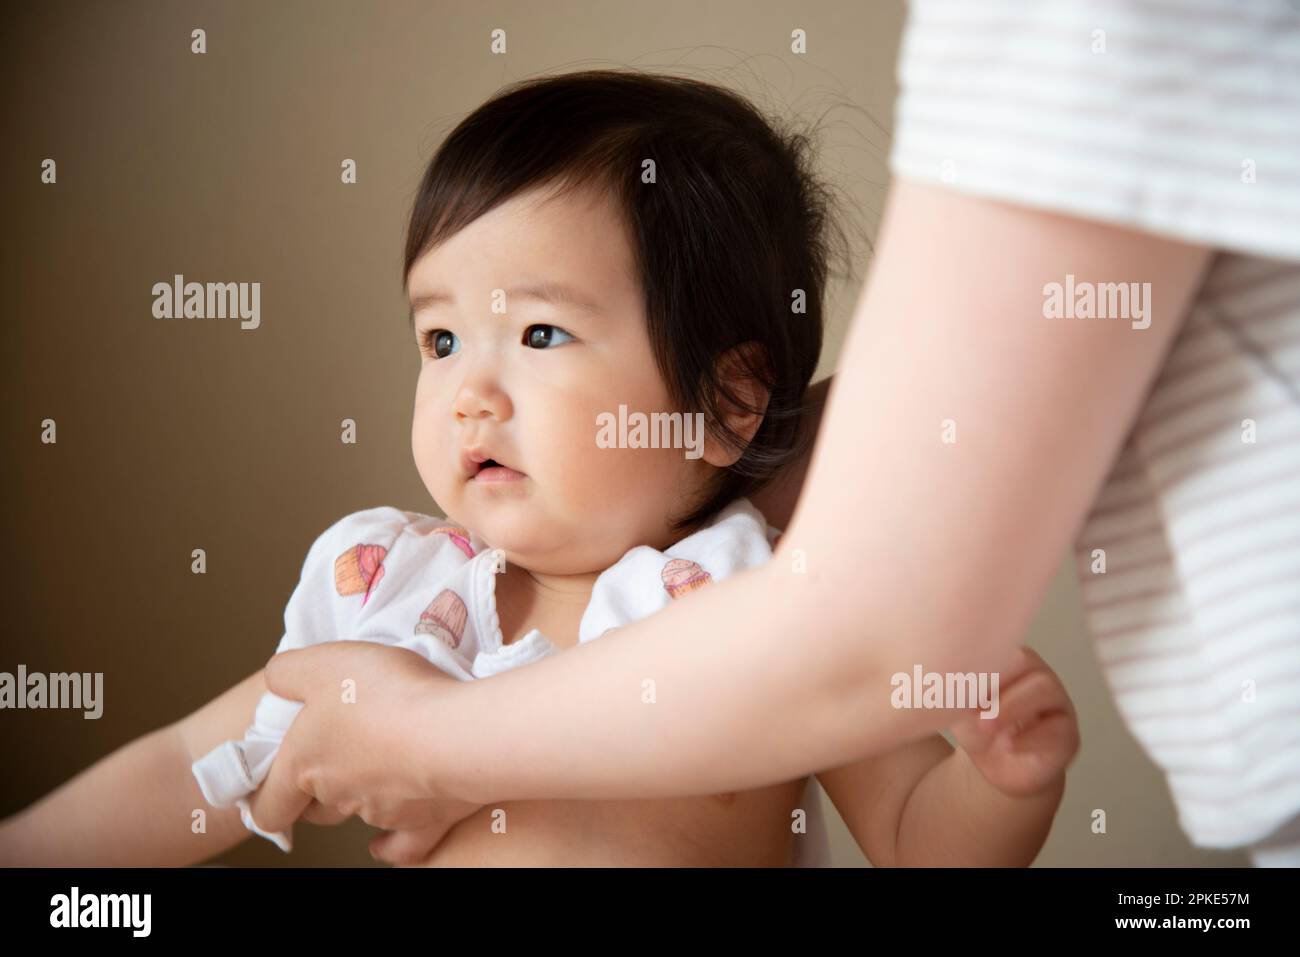 Baby getting dressed Stock Photo